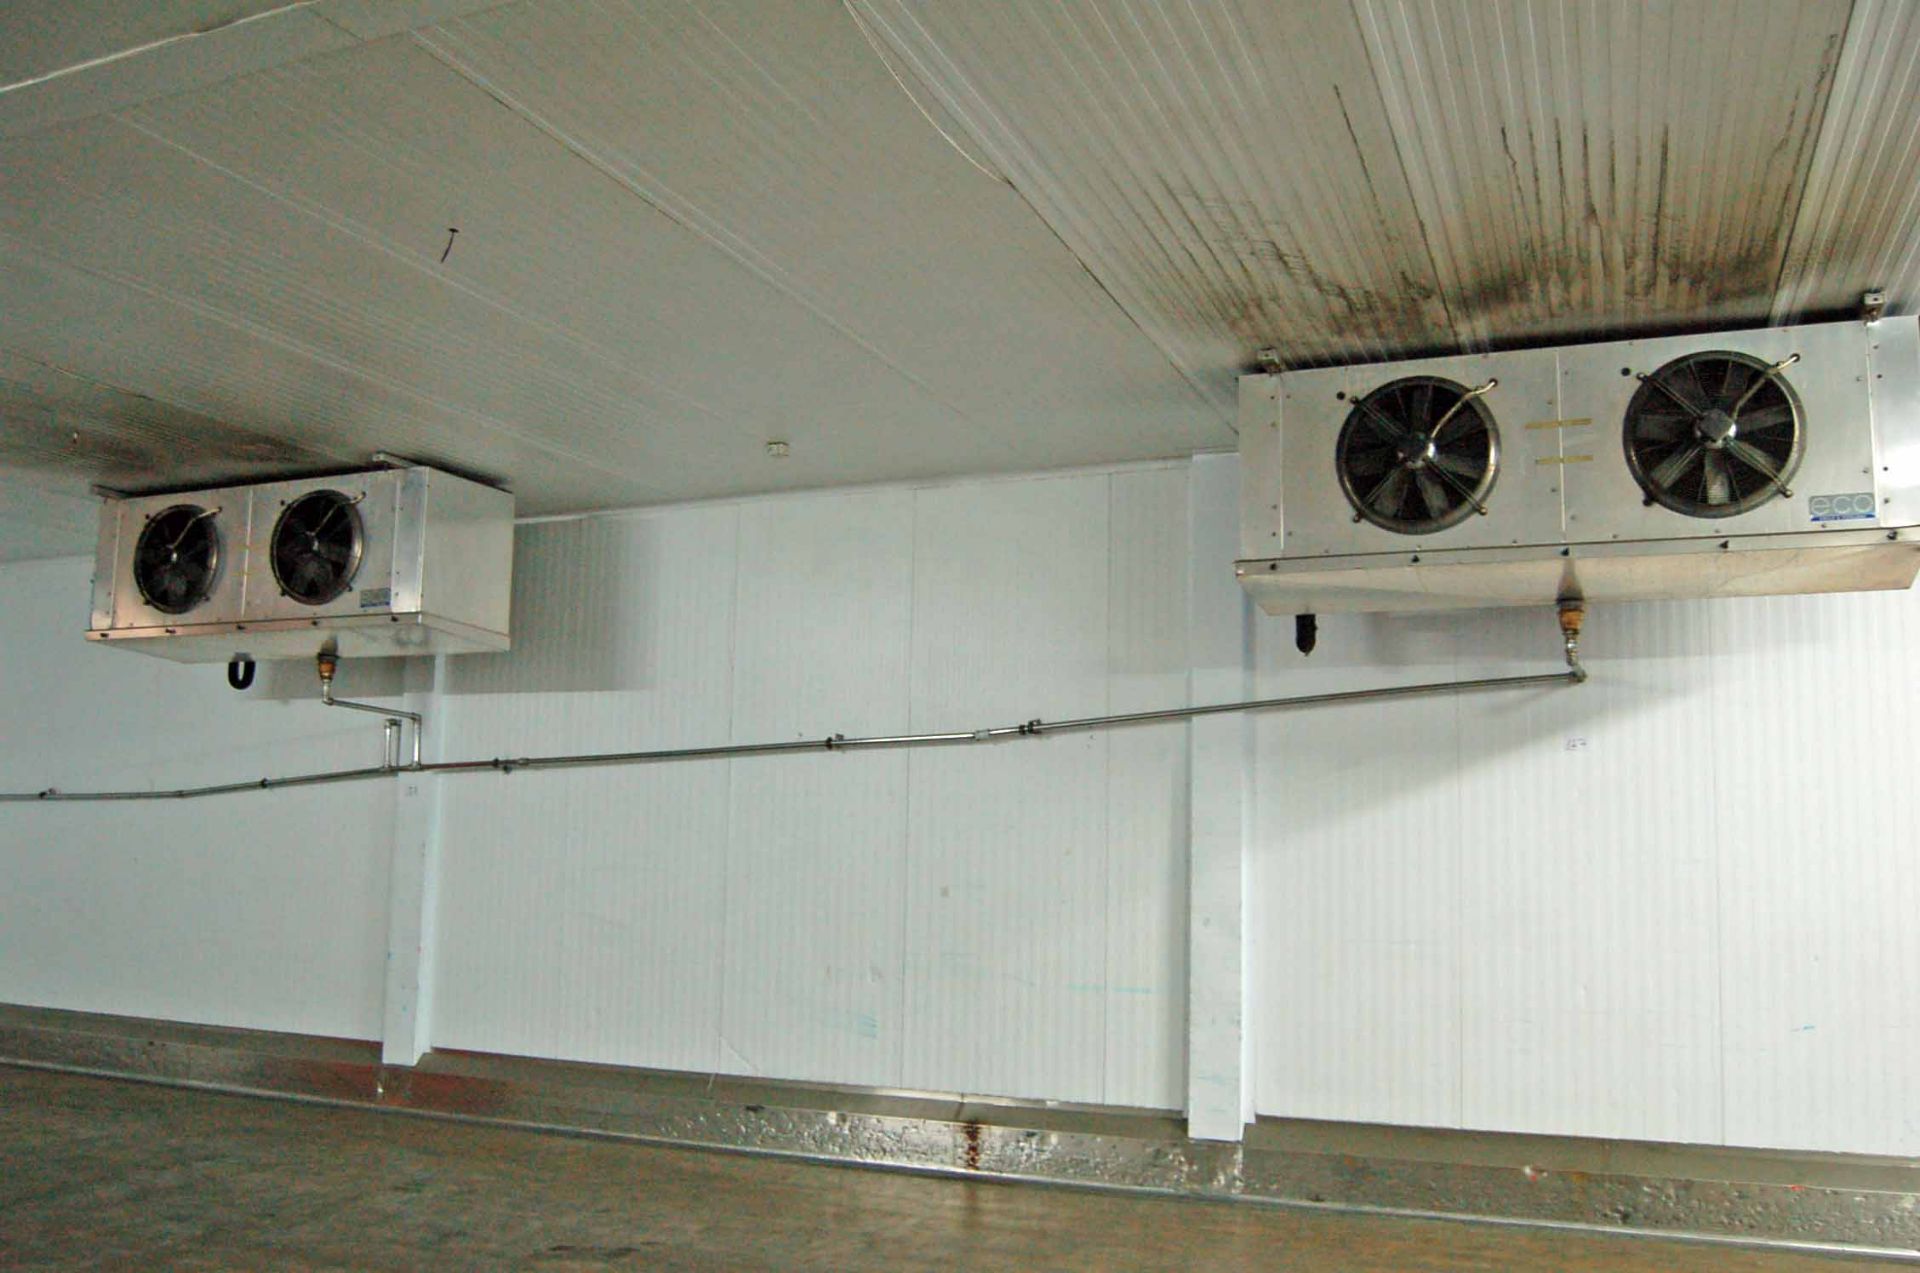 Two ECO COILS AND COOLERS Stainless Steel Clad Ceiling mounted Triple Fan Chiller Evaporator - Image 5 of 6